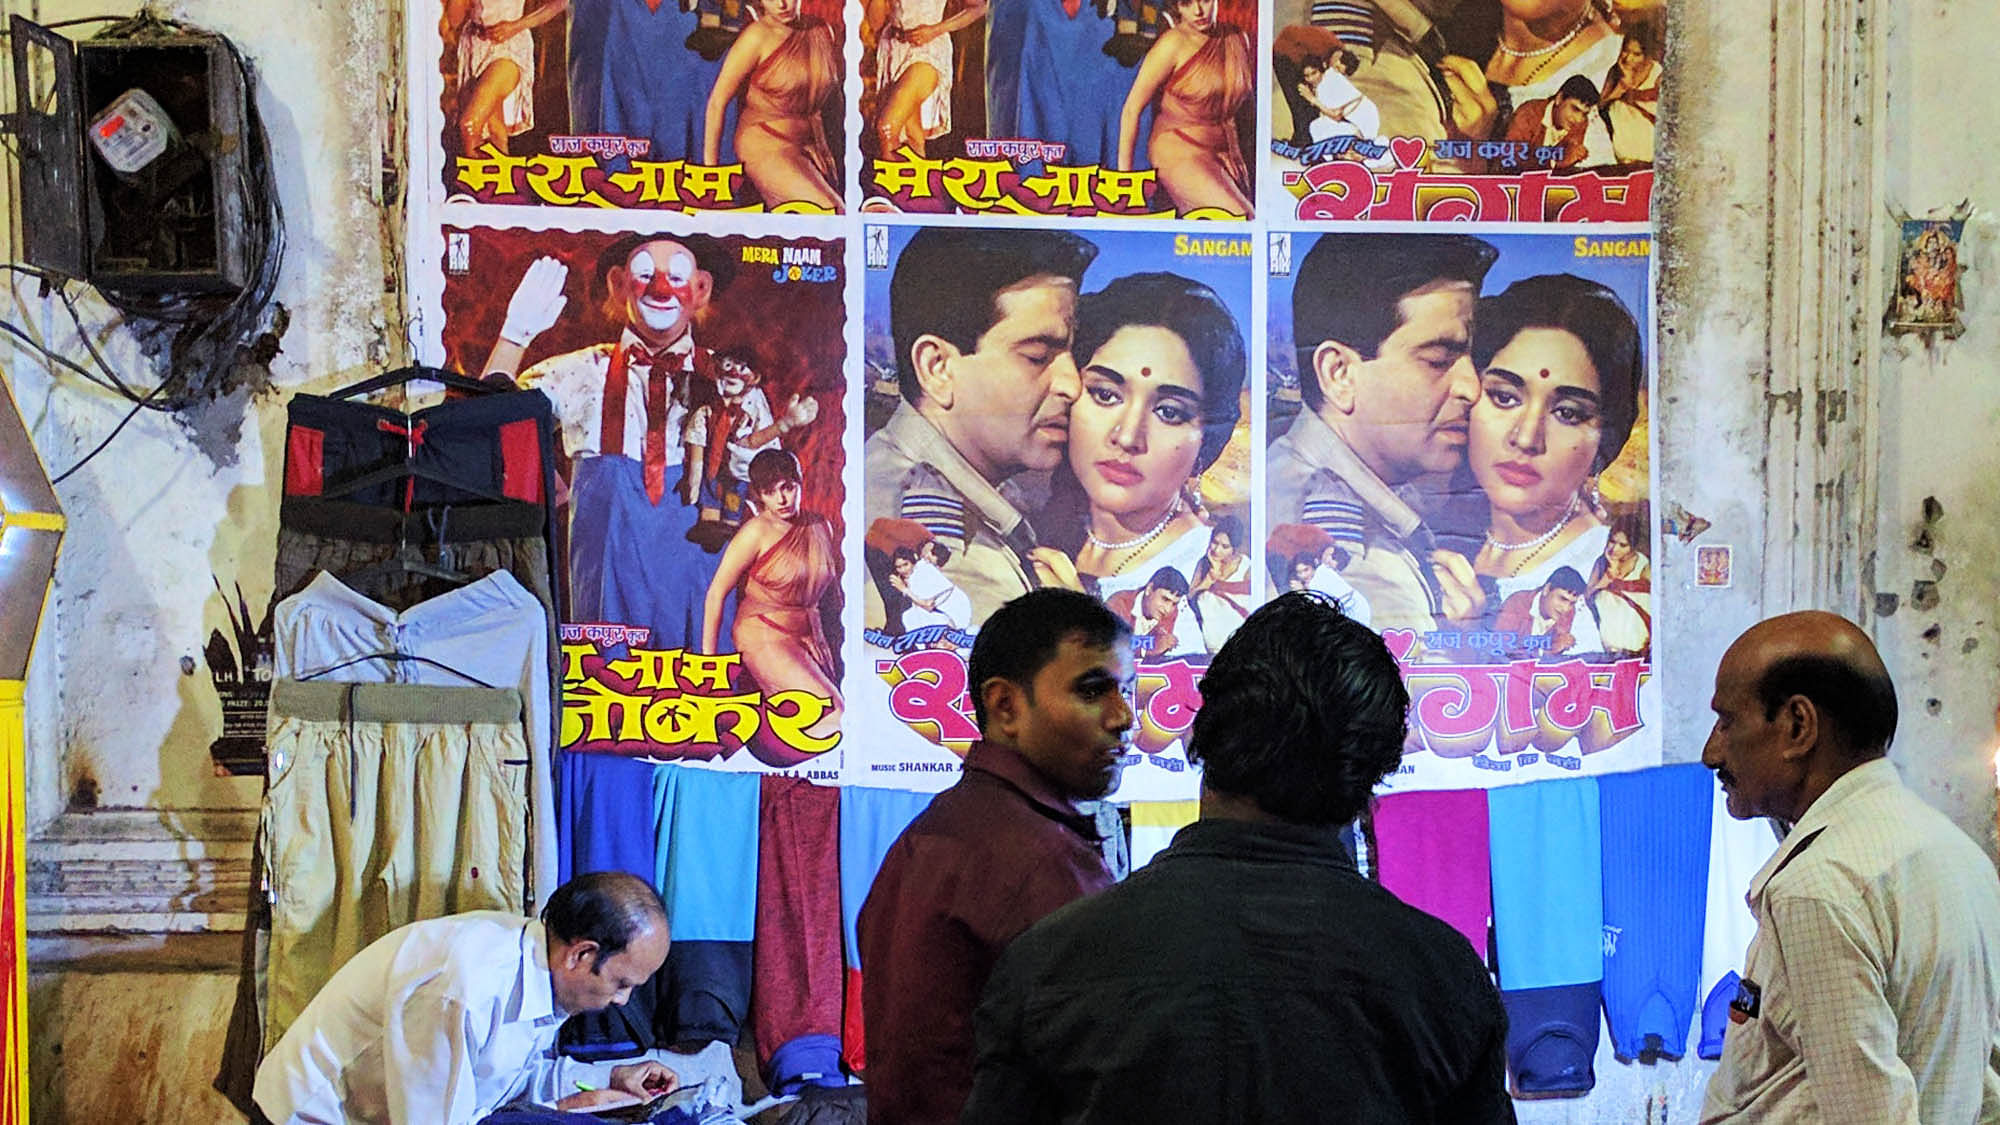 Regal Theatre closed on 30 March, with screenings of <i>Mera Naam Joker</i>, and <i>Sangam</i>.